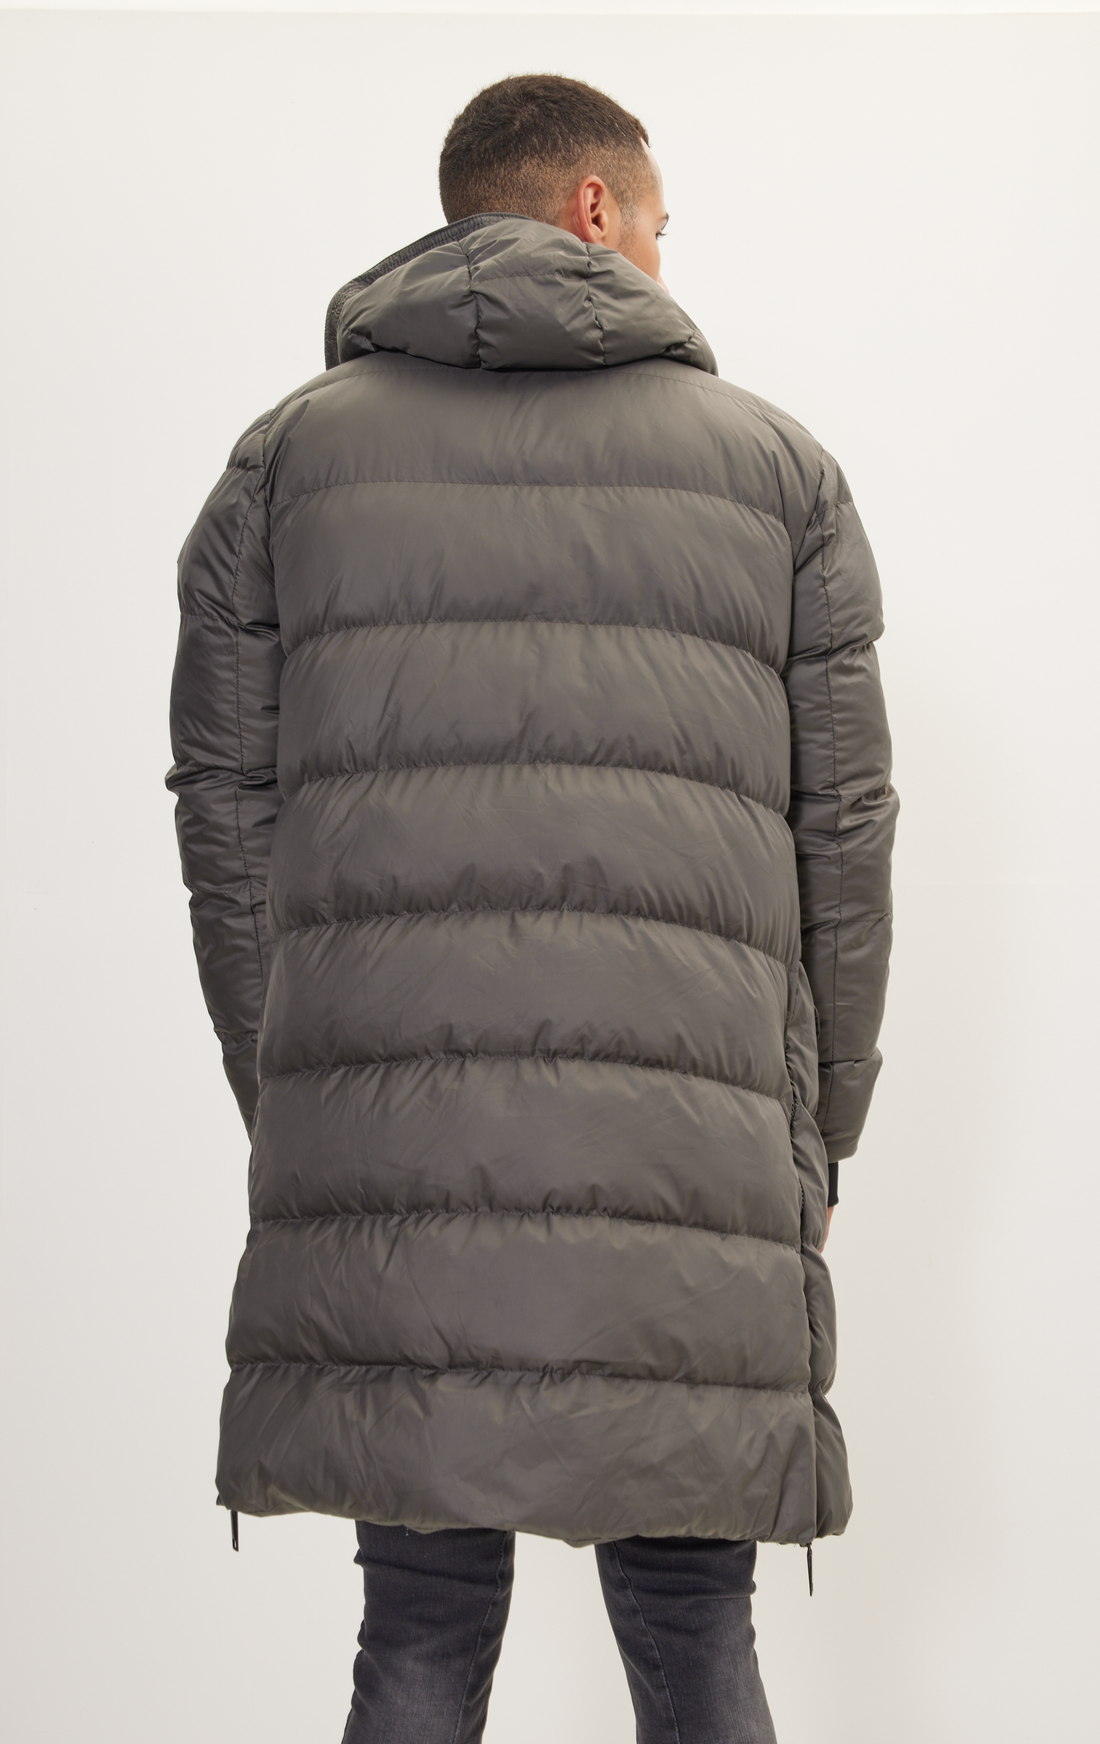 N° 71277 WIDE HOODED LONG PADDED COAT - ANTHRACITE